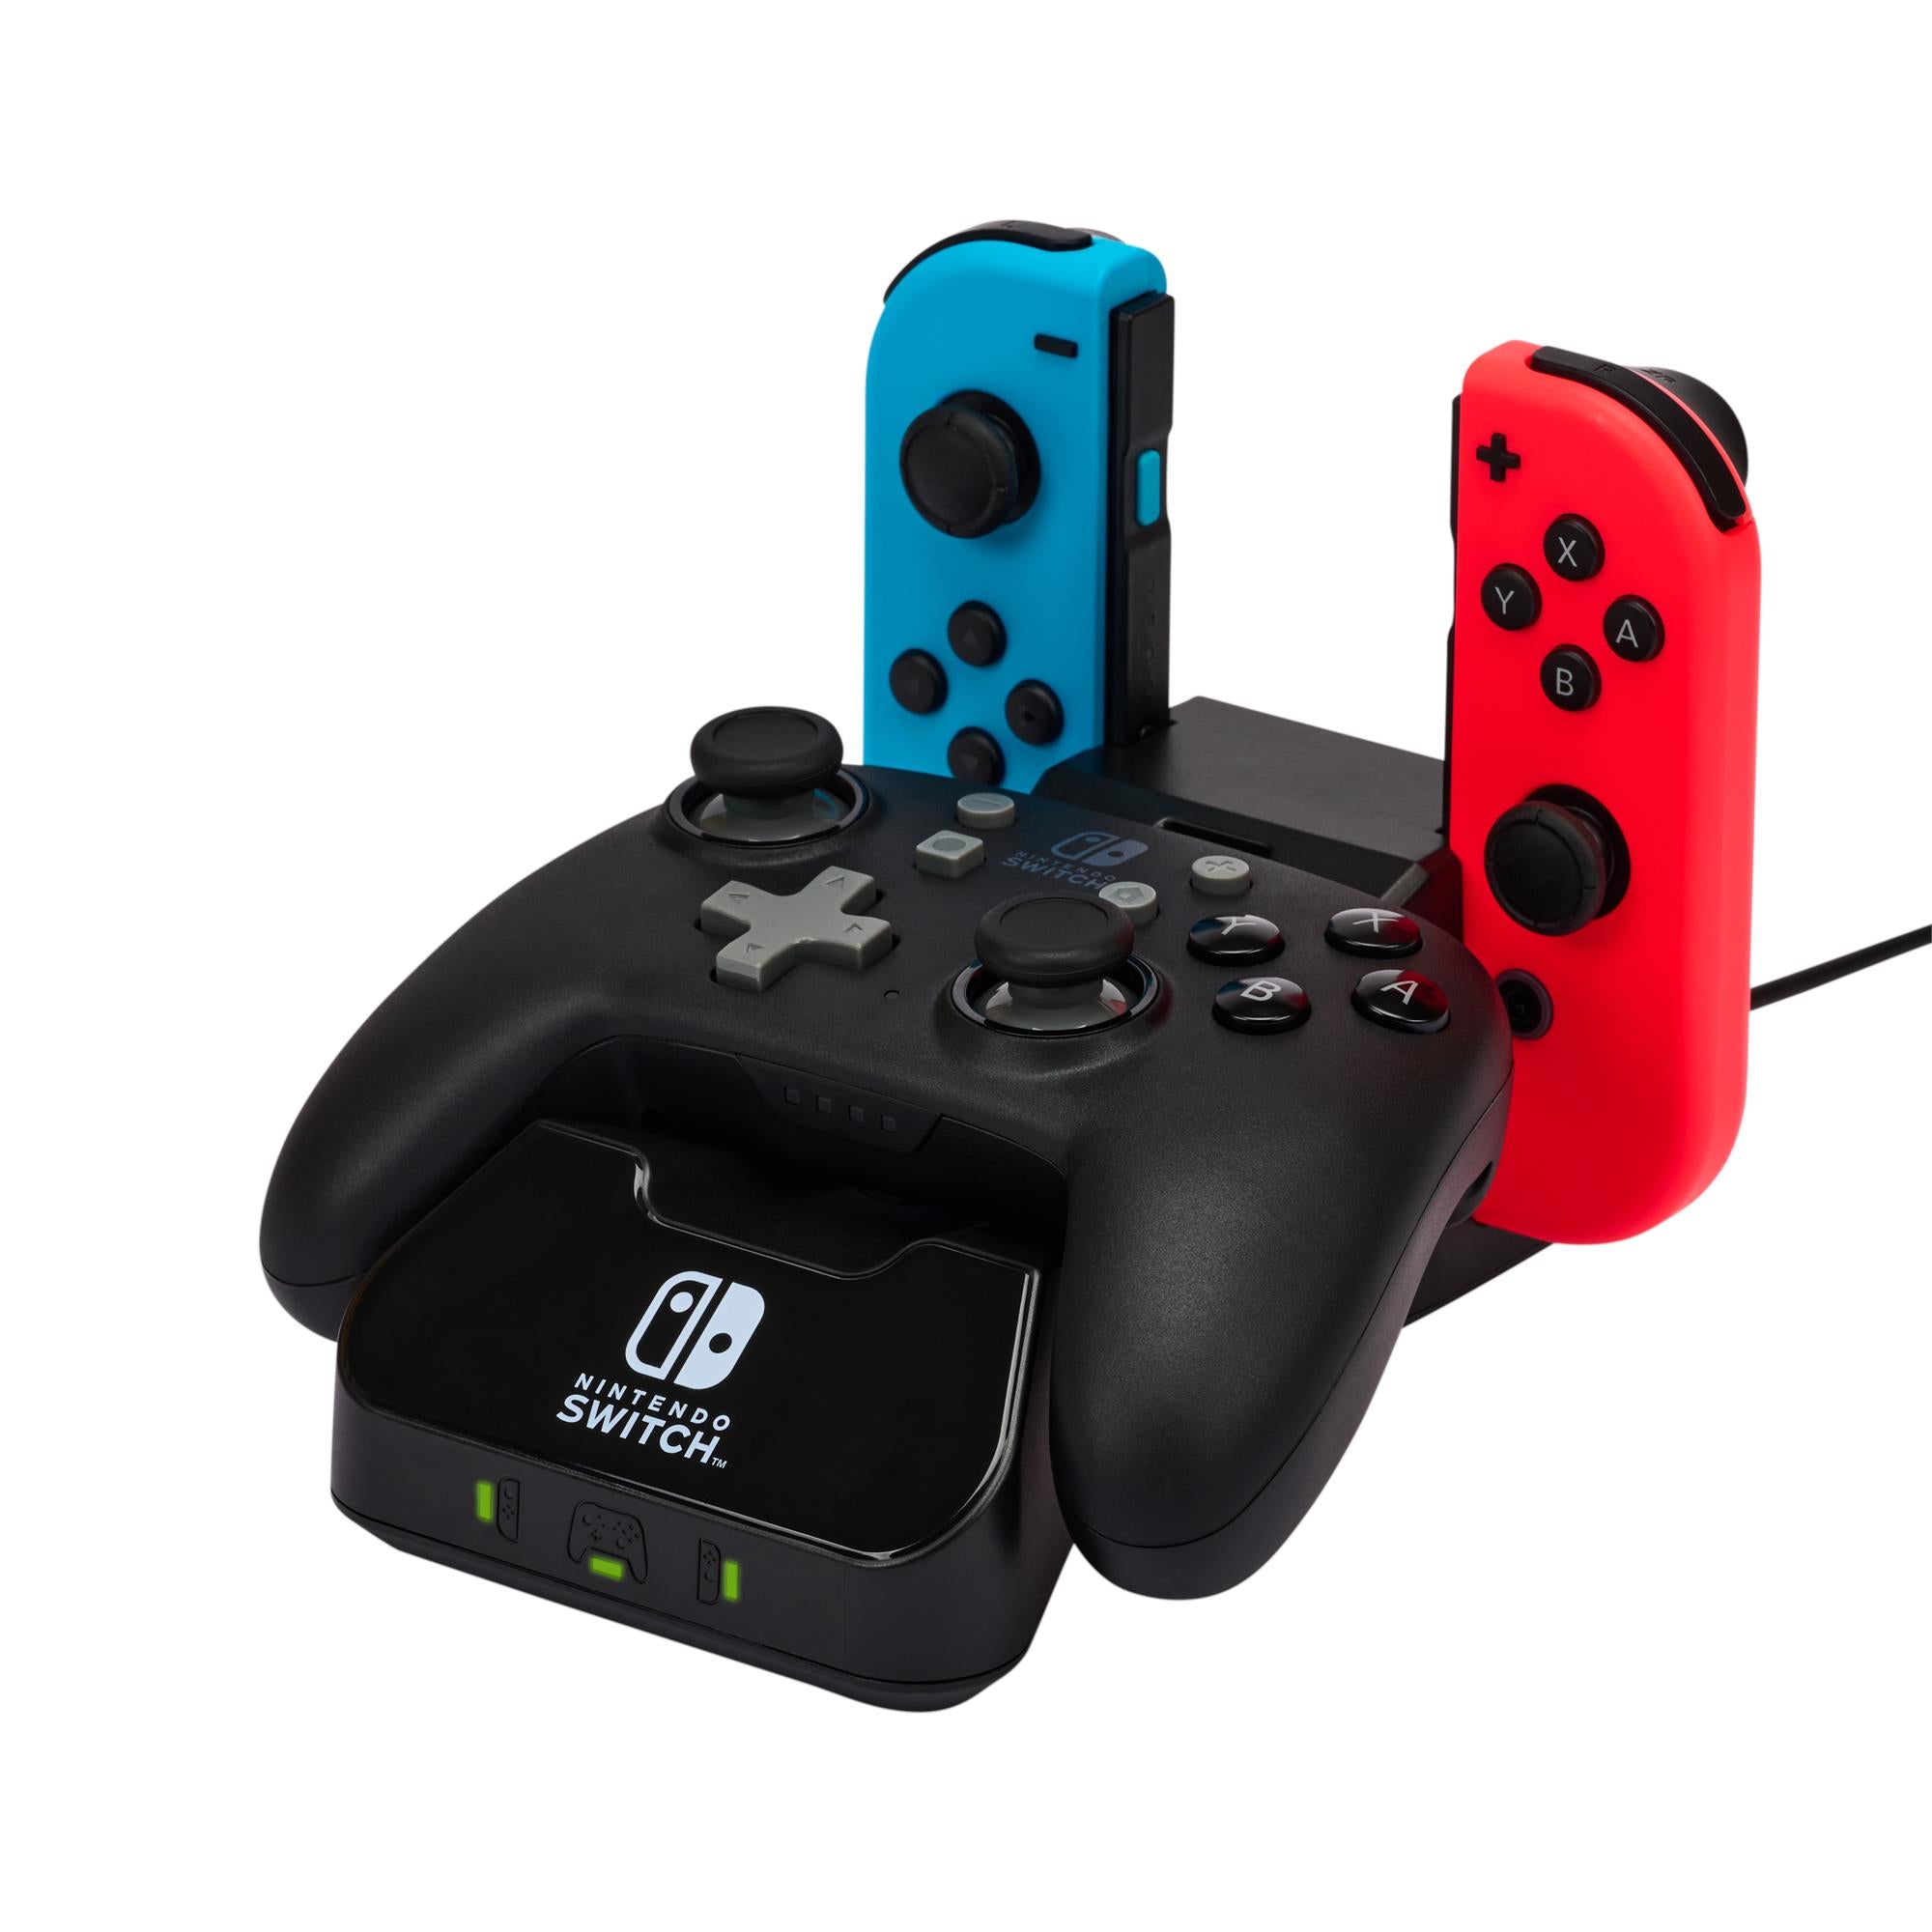 powera nintendo switch controller and joy-con charging station / dock